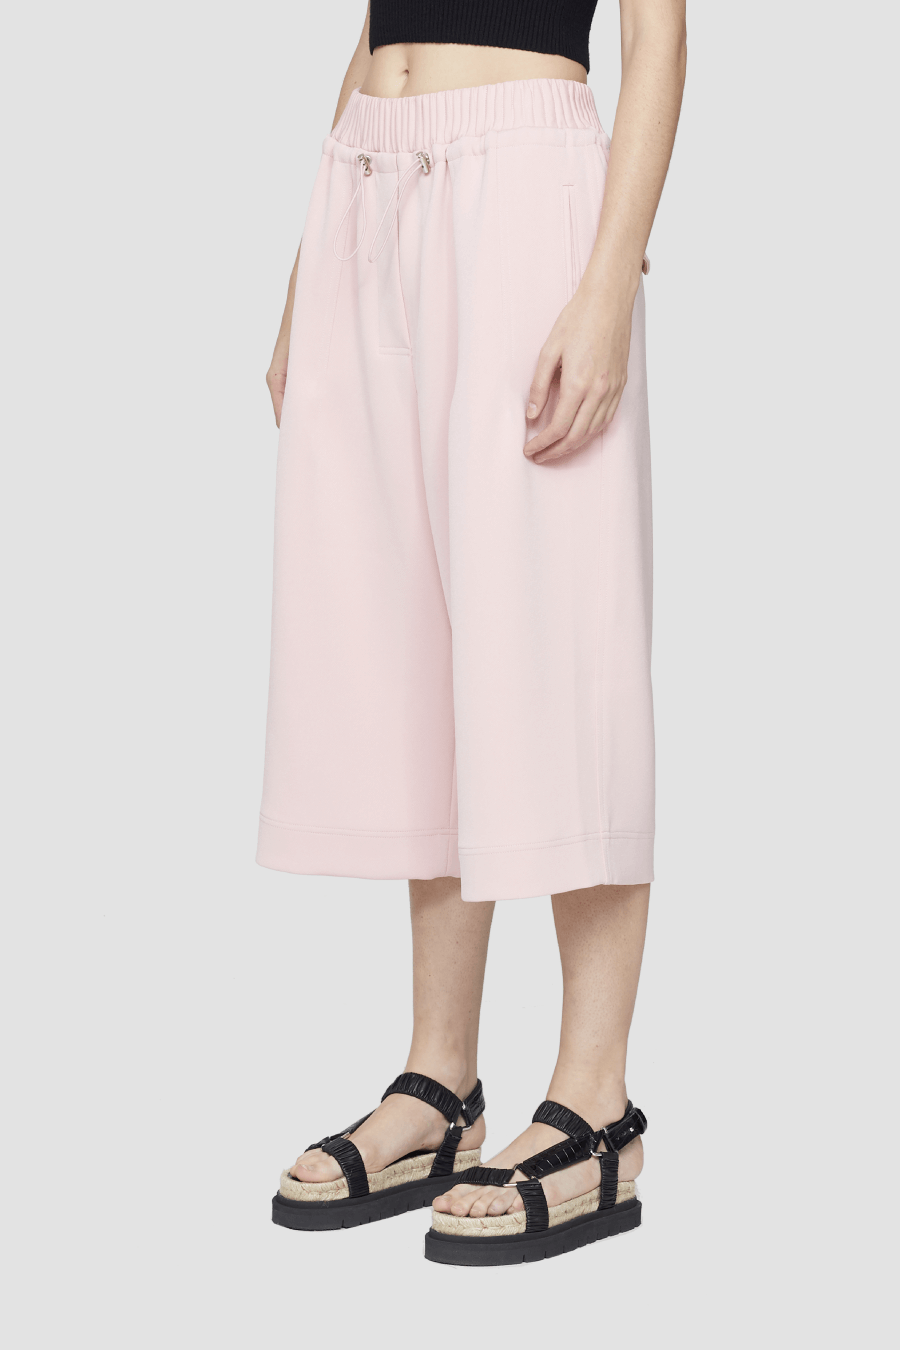 3.1 Phillip Lim E211-5563SWT Pull On Culottes - Blossom Side